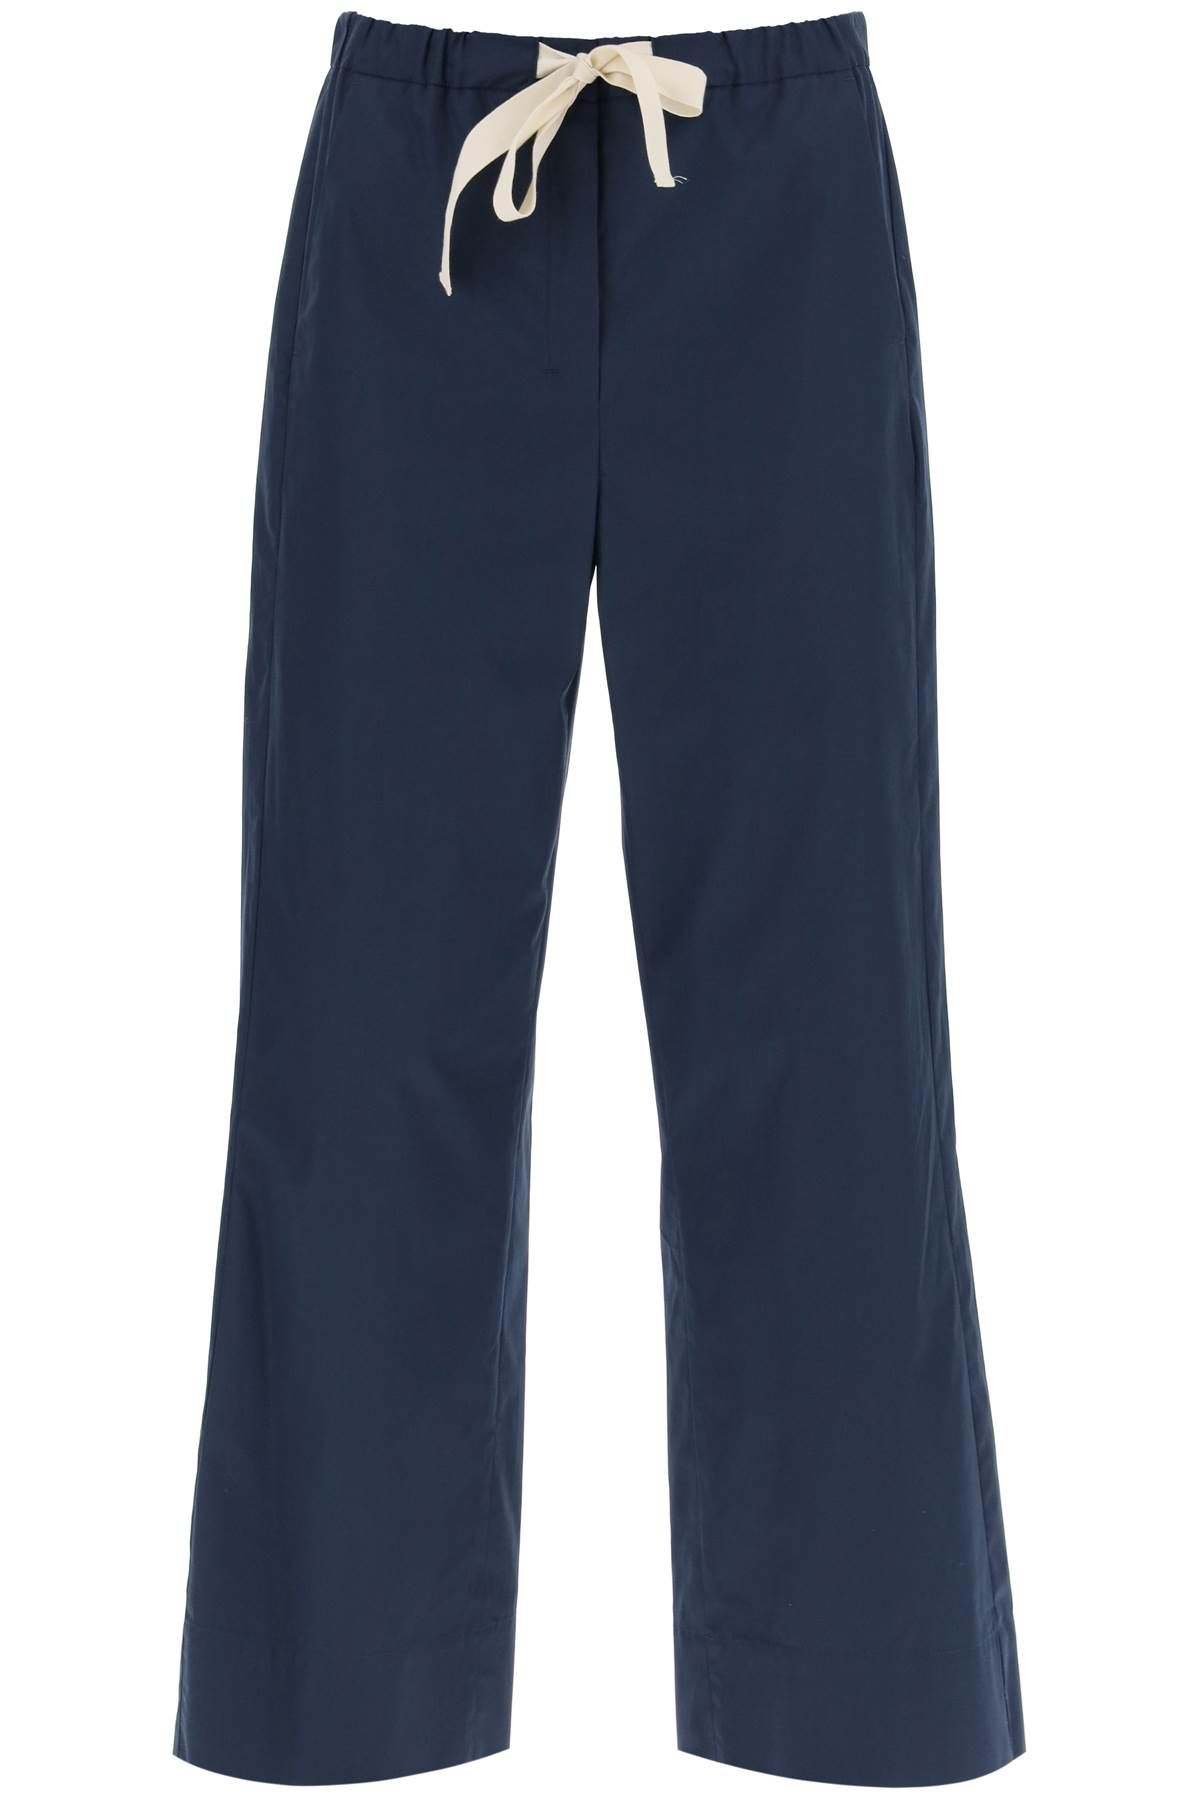 's Max Mara Cropped Silver Pants In Blue